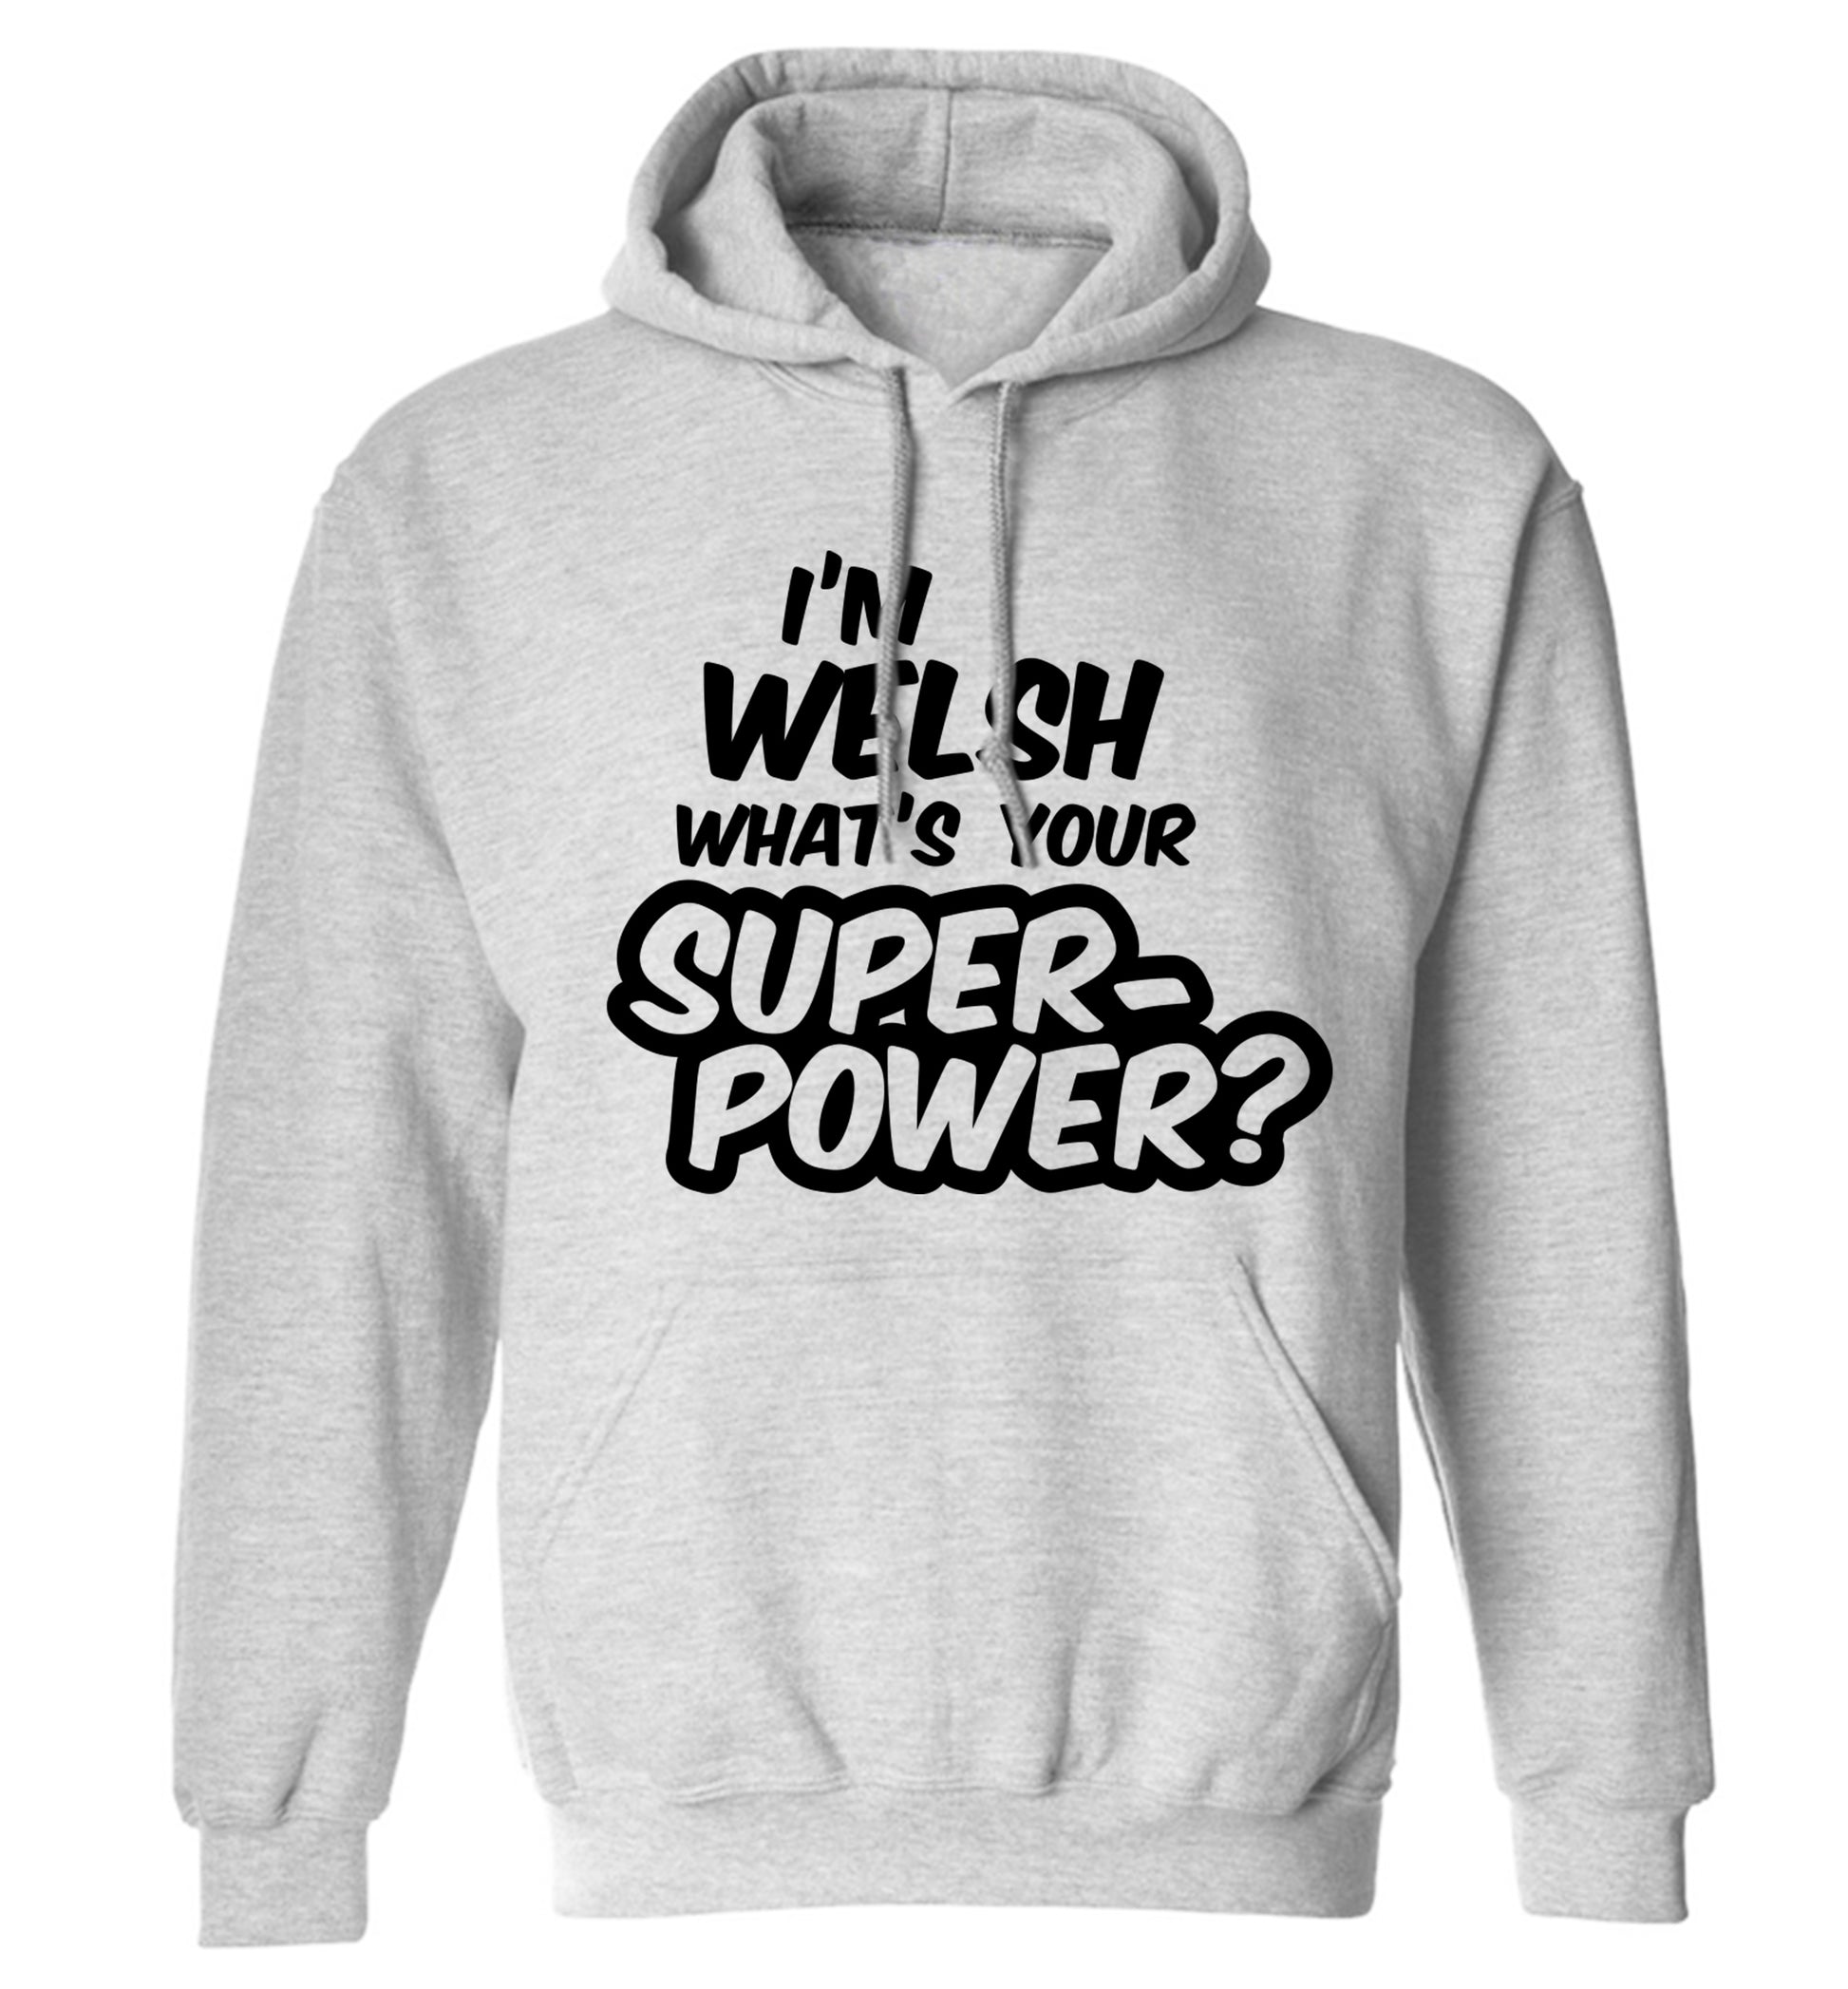 I'm Welsh what's your superpower? adults unisex grey hoodie 2XL